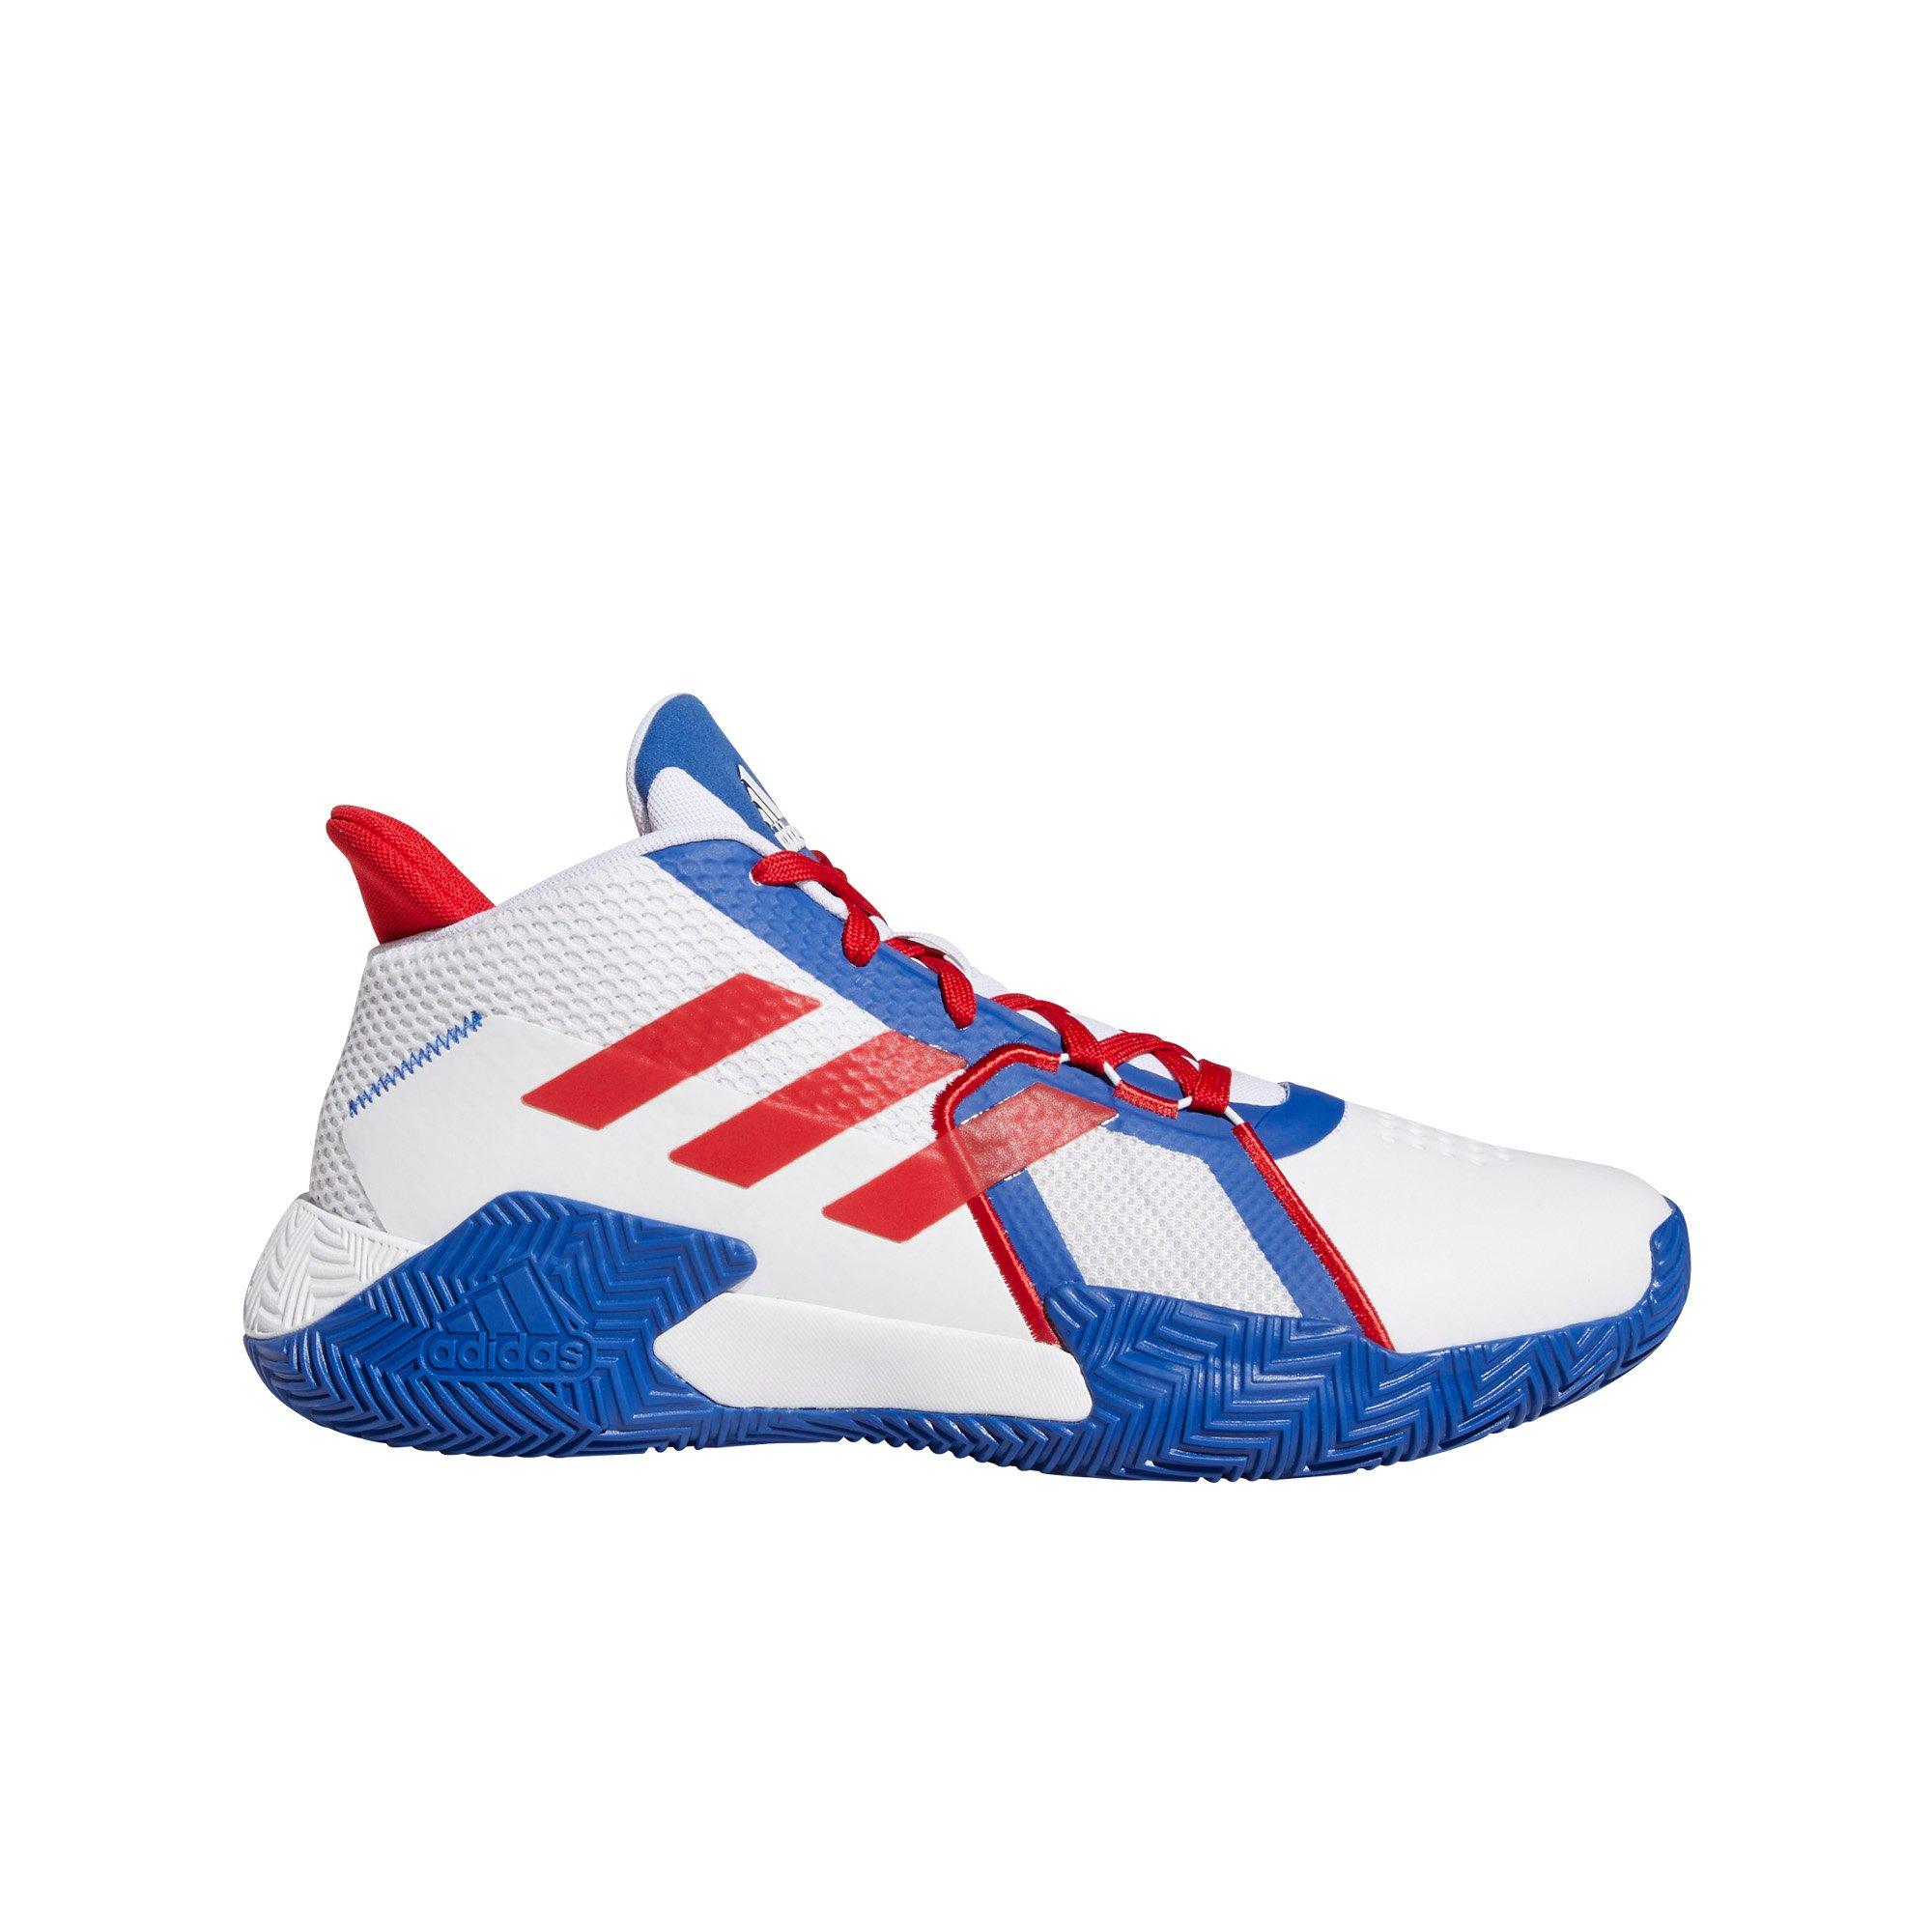 blue and red basketball shoes